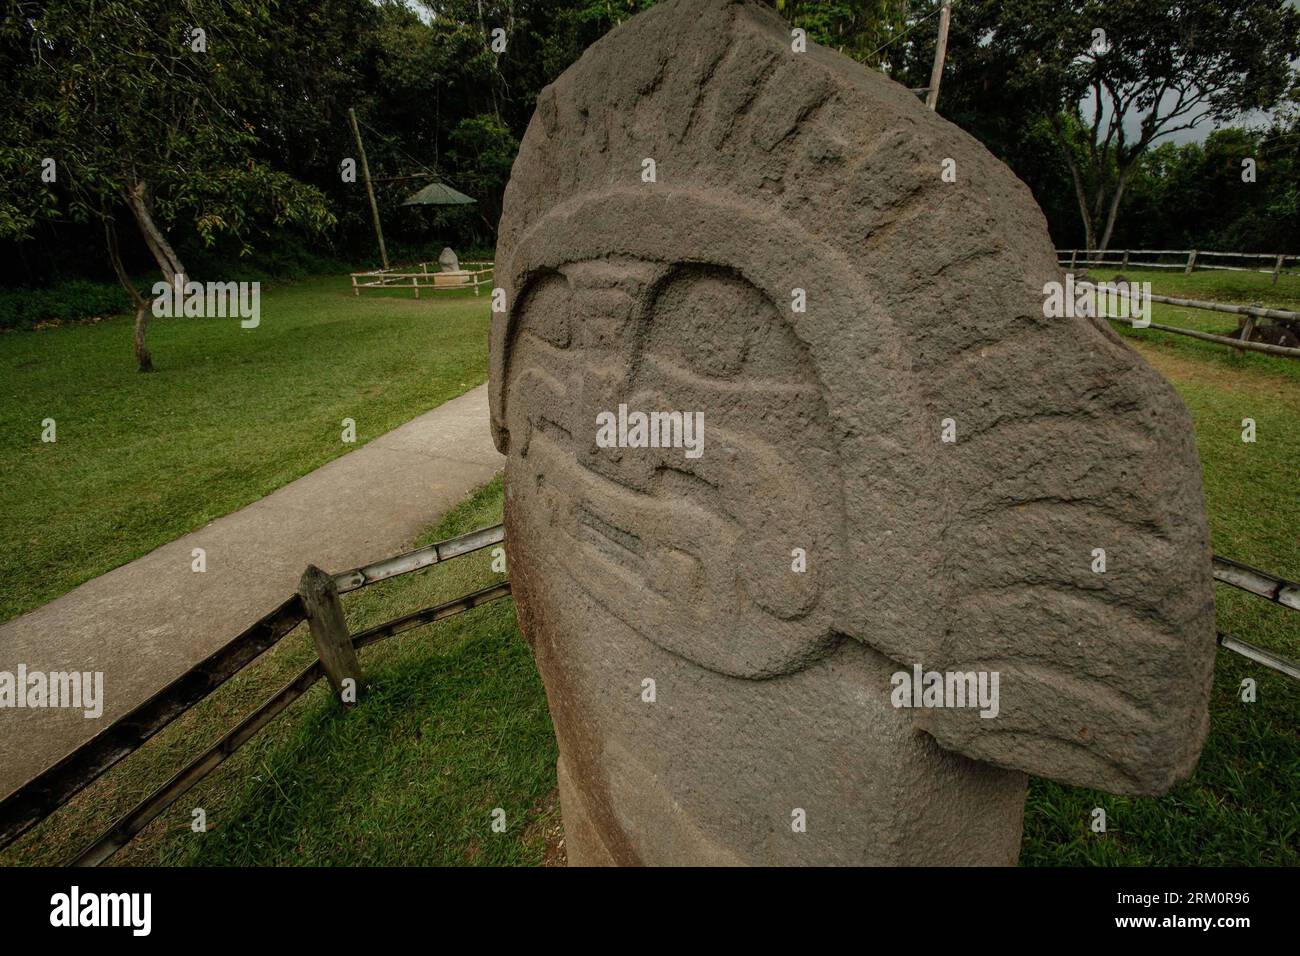 Bildnummer: 59465643  Datum: 31.03.2013  Copyright: imago/Xinhua An sculpture is showed at San Agustin Archaeological Park in Huila, Colombia, on March 31, 2013. San Agustin Archaeological Park is located in the southern Colombian Department of Huila, which will celebrate its centenary and being denominated as World Cultural Heritage in 1995 by United Nations Educational, Scientific and Cultural Organization (UNESCO) this year. (Xinhua/Jhon Paz) (rh) (sp) (dtf) COLOMBIA-HUILA-SAN AGUSTIN ARCHAEOLOGICAL PARK PUBLICATIONxNOTxINxCHN Gesellschaft x0x xub 2013 quer     59465643 Date 31 03 2013 Copy Stock Photo